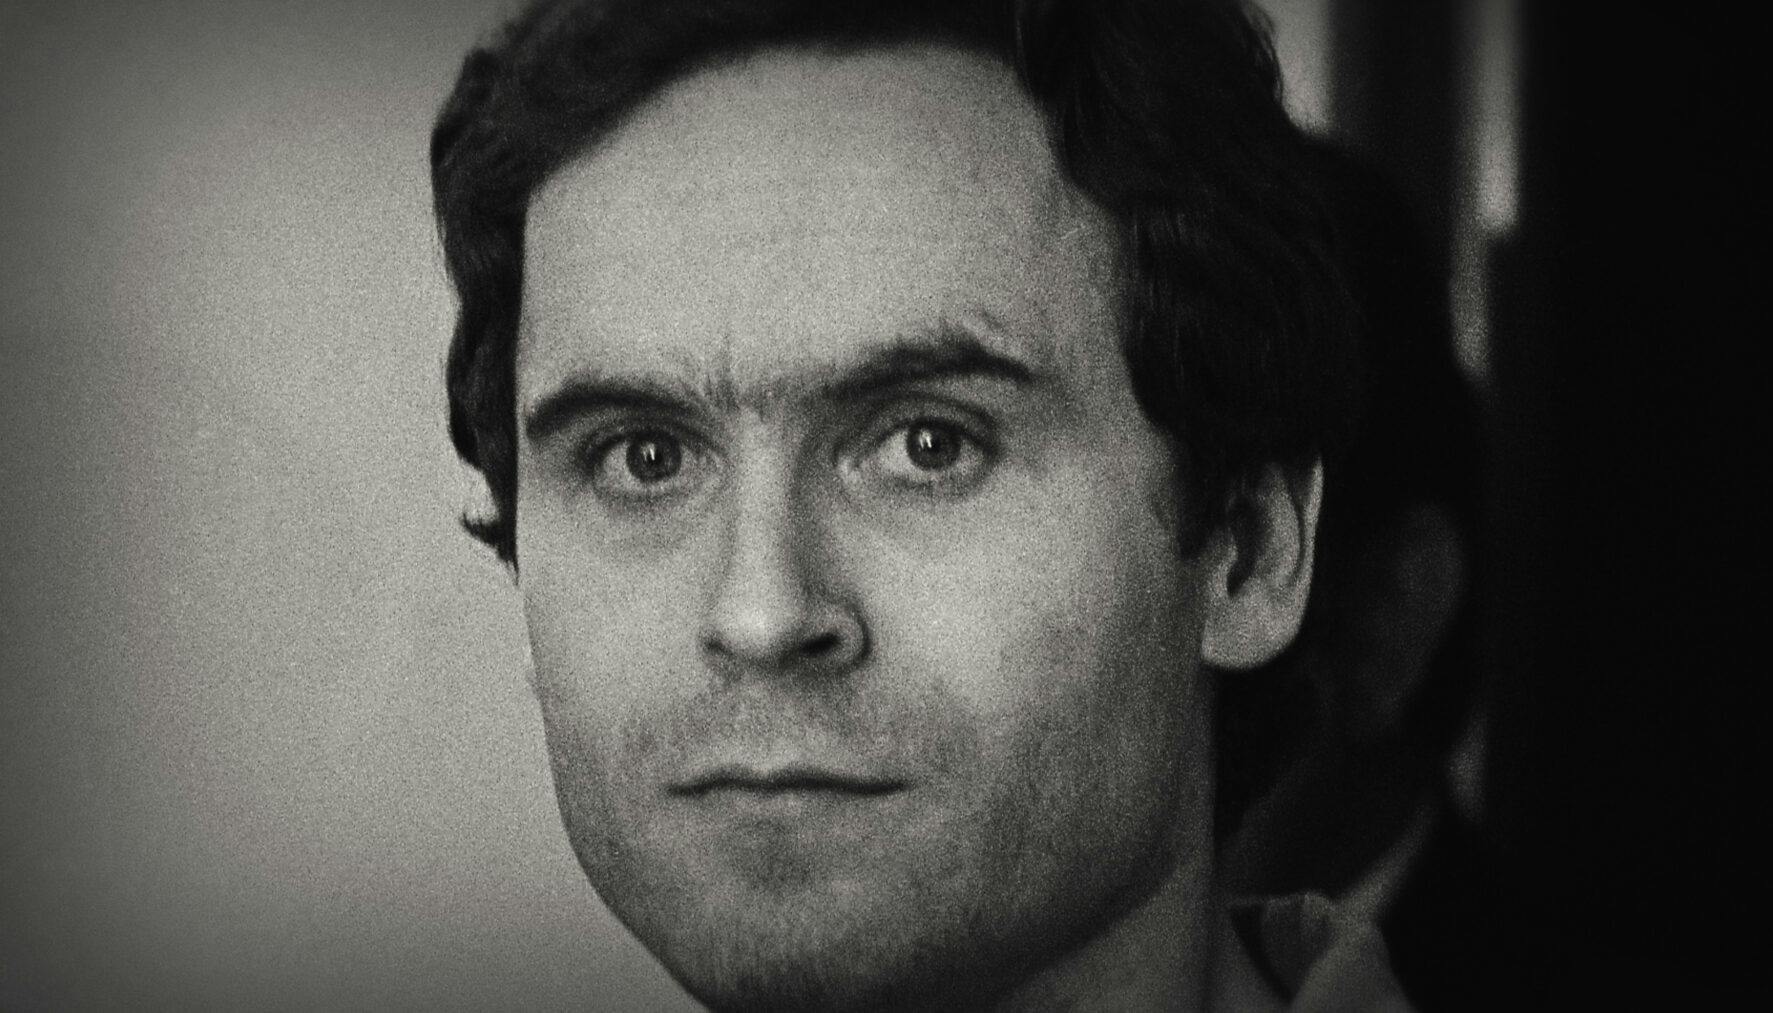 https://imgix.vielskerserier.dk/2021/09/Conversations_with_a_Killer__The_Ted_Bundy_Tapes_S01E01_8m39s12449f.jpg